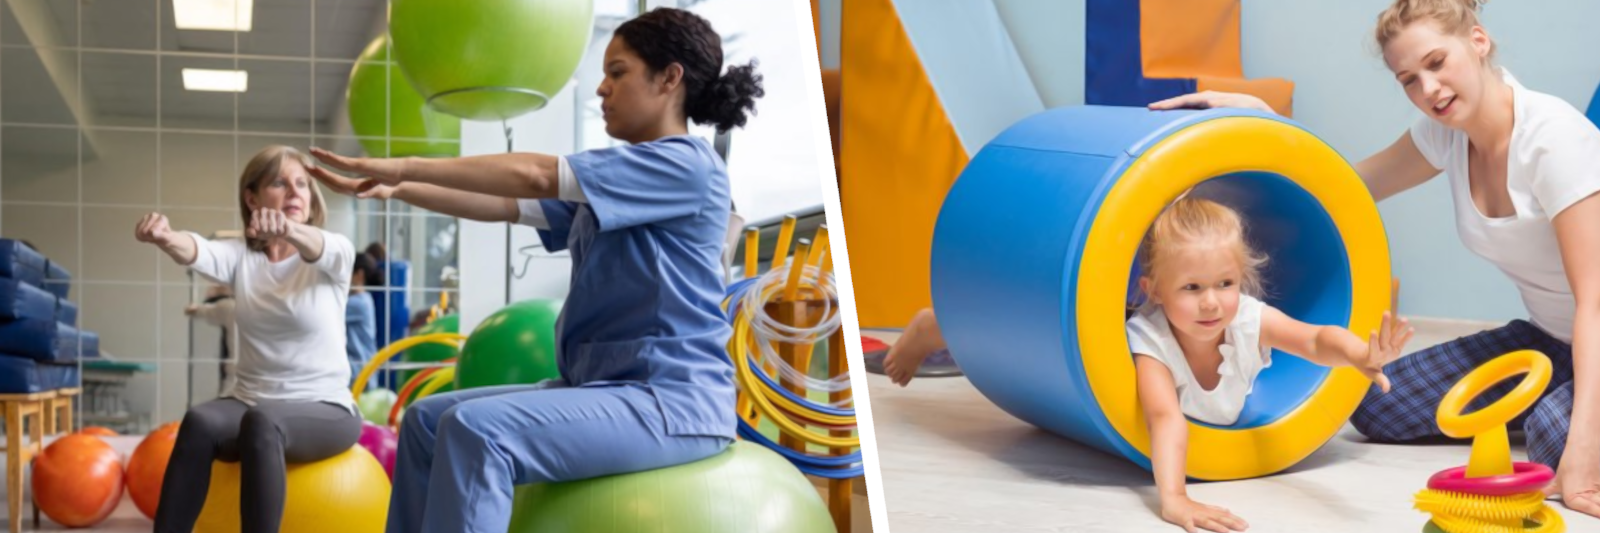 To the left: Physical therapy between adults on balance balls. To the right: Physical therapy with a child.